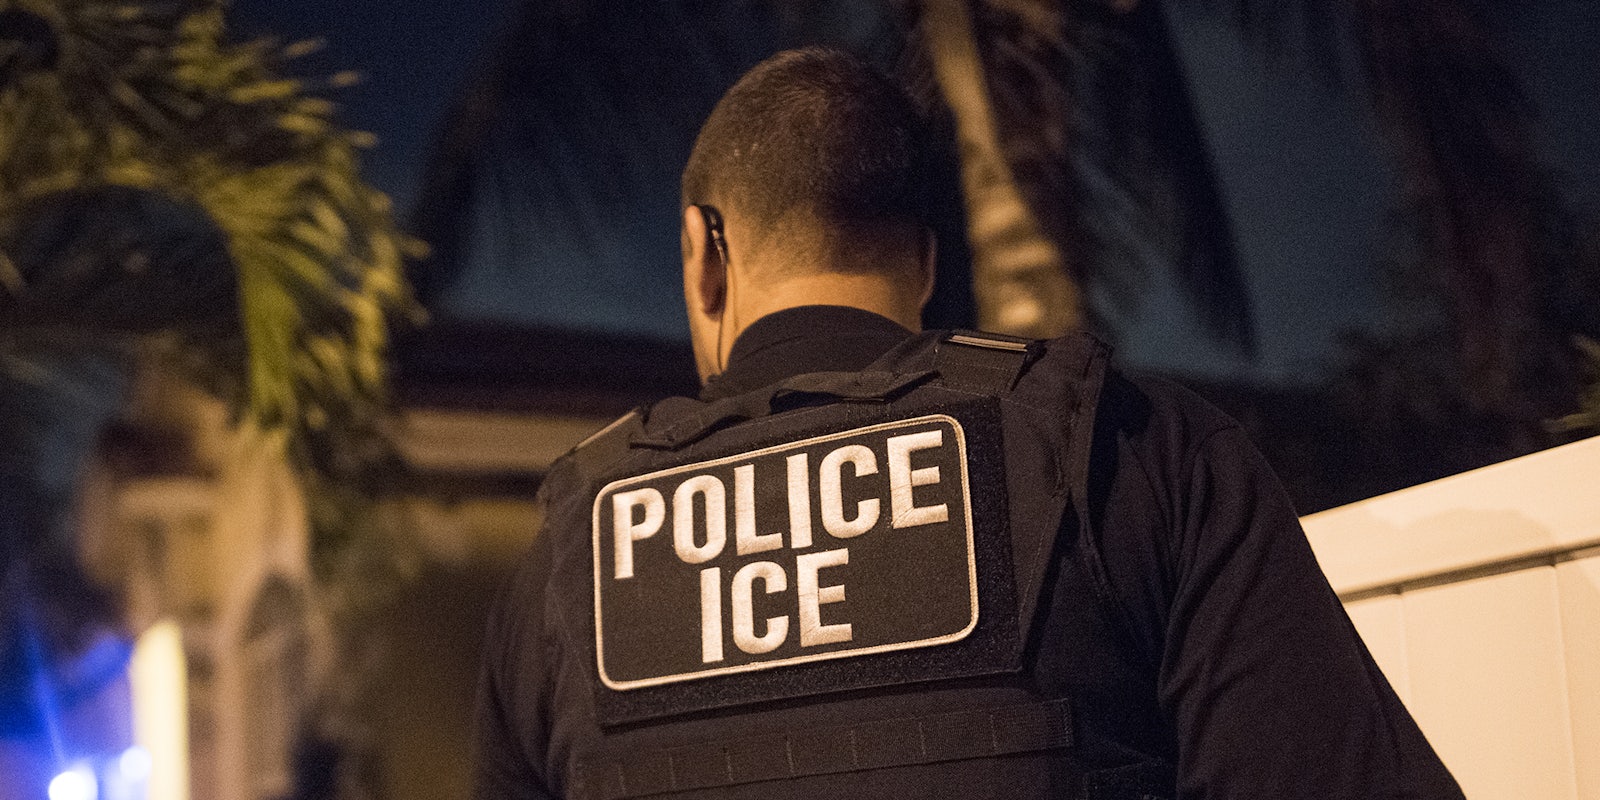 U.S. Immigration and Customs Enforcement (ICE) Officer